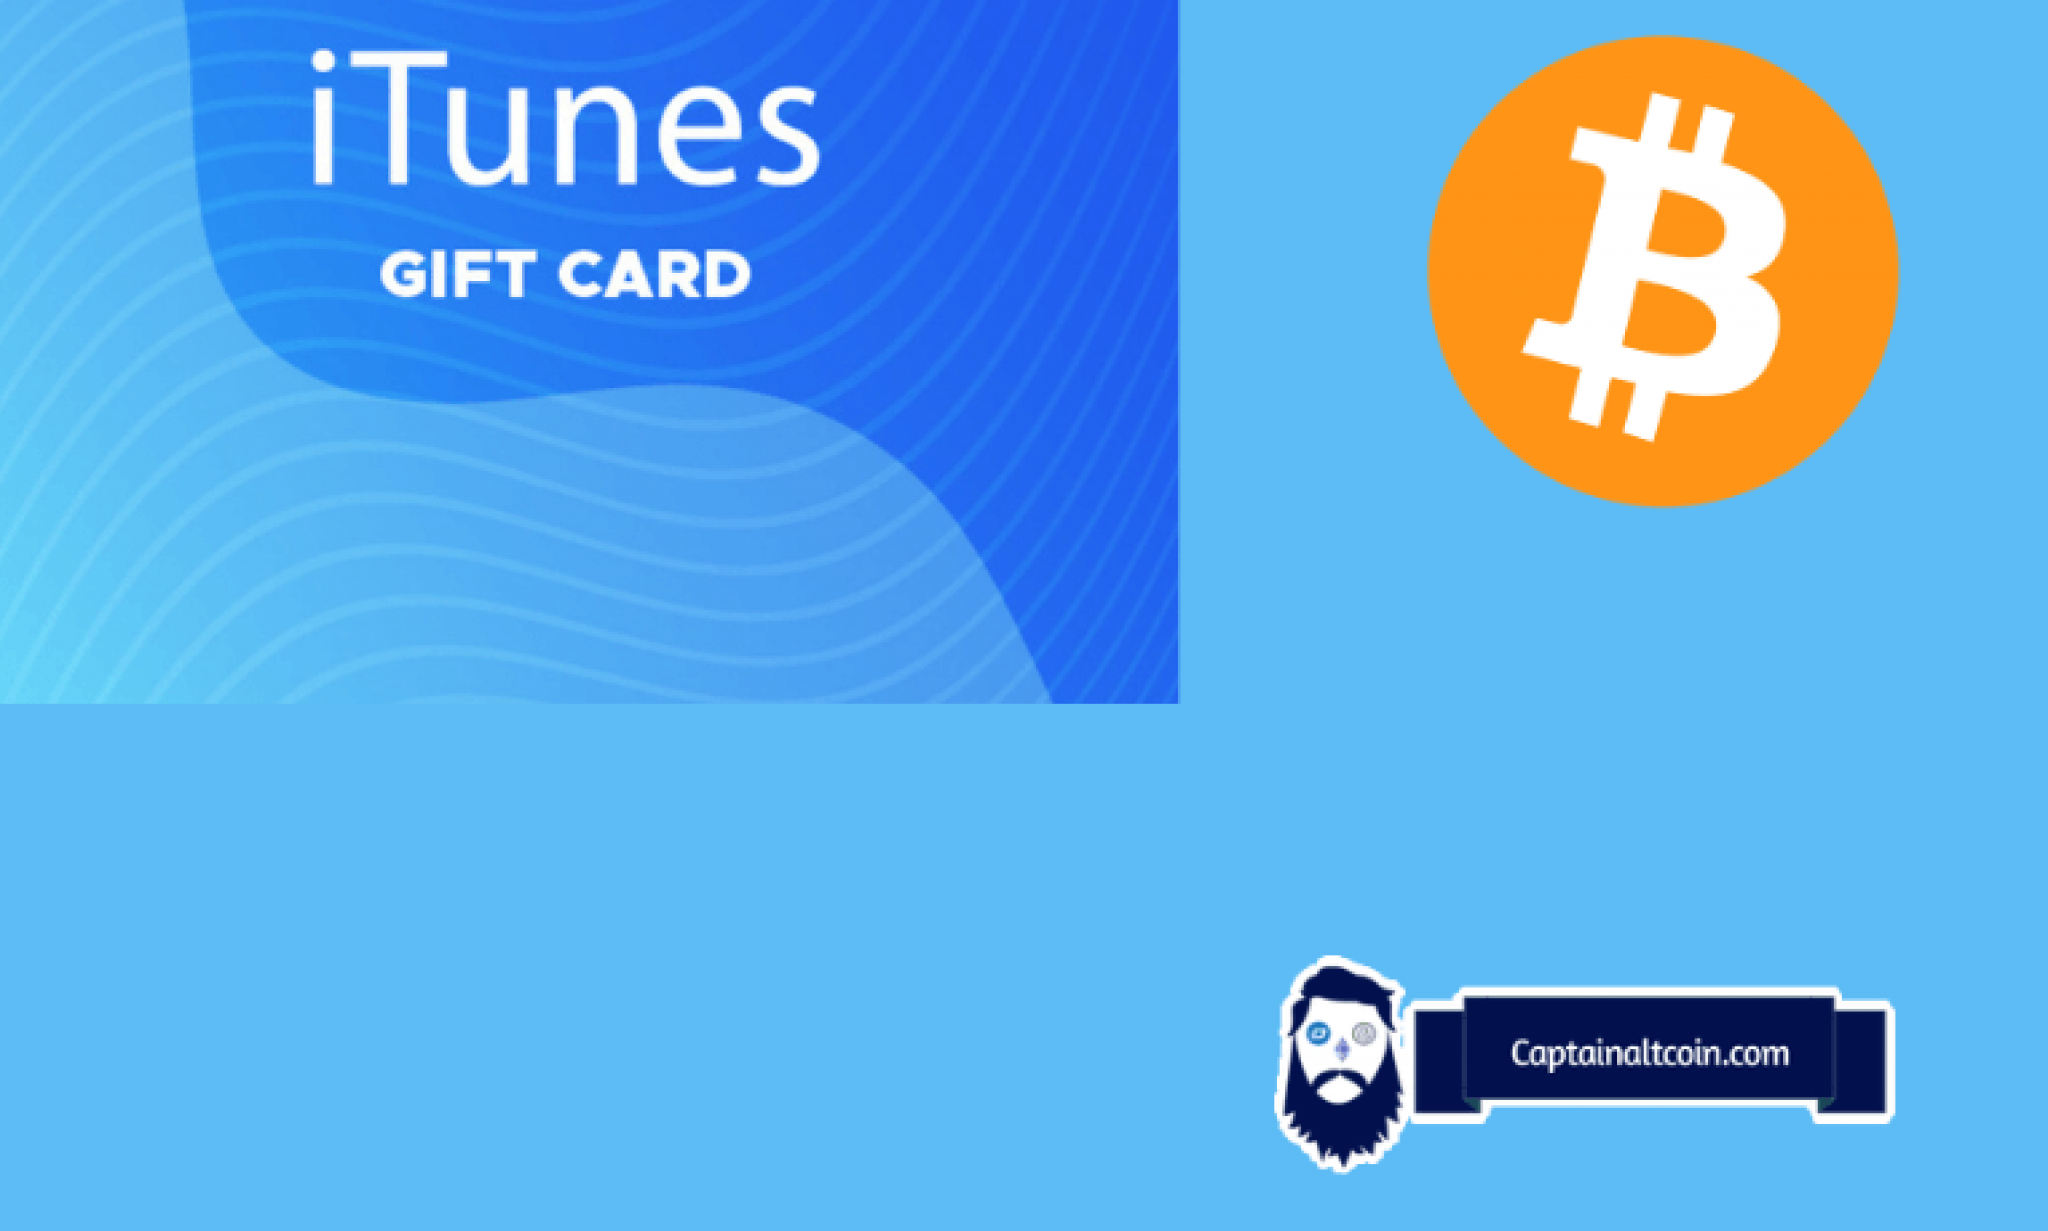 buy bitcoin with 200 itunes gc code for bitcoin